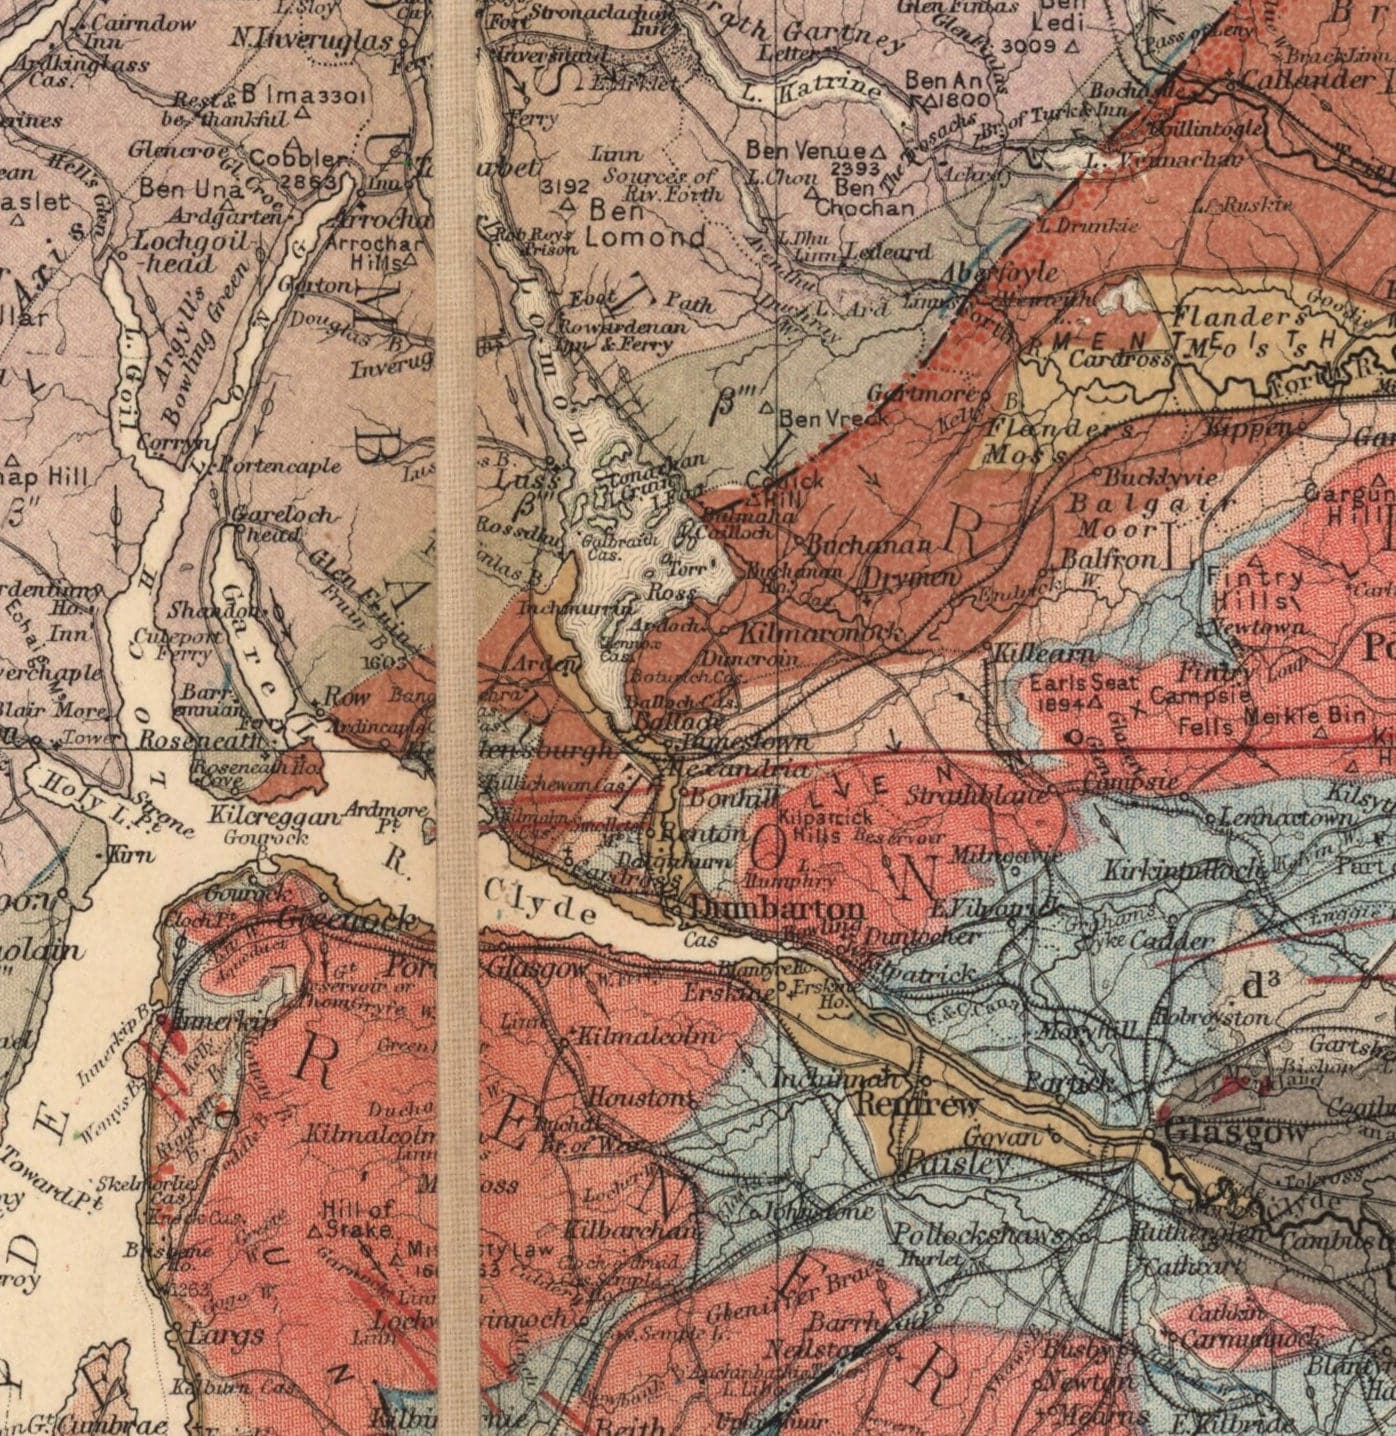 Scotland Geology Map - Old Map of Scotland by A. Geikie, 1876